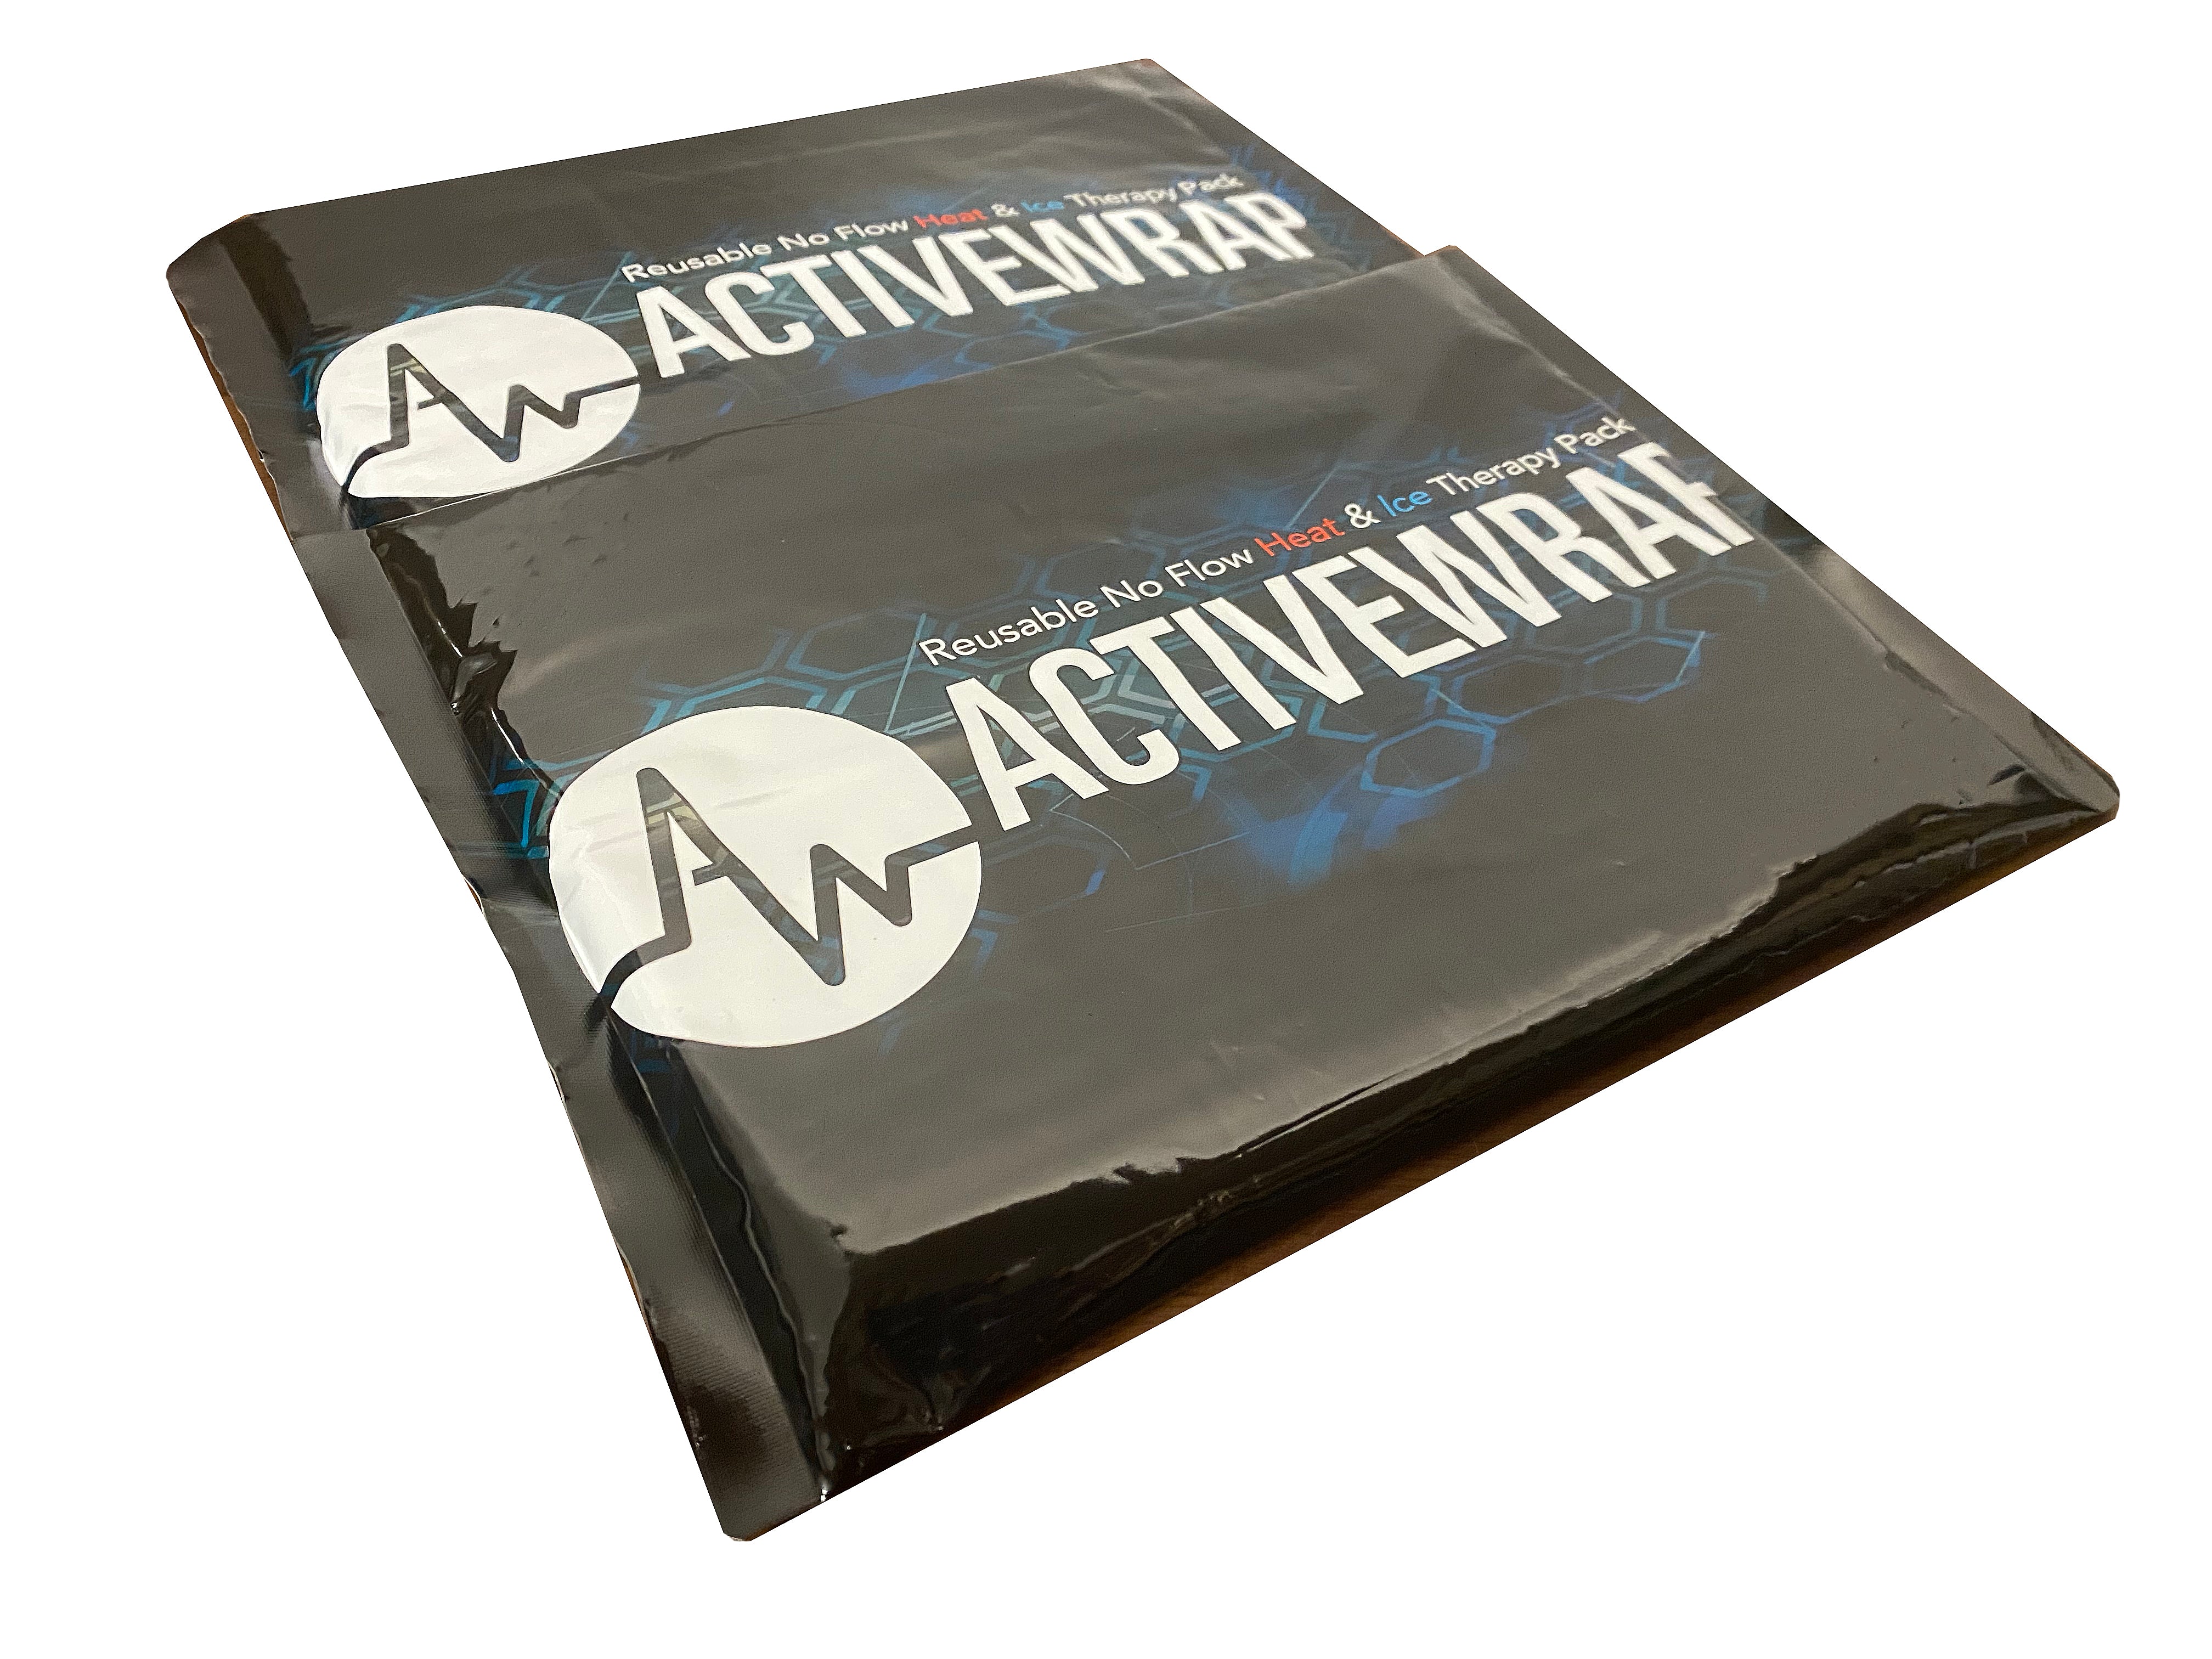 ActiveWrap Large Heat and Ice Pack, Item BAWP004, 7 x 10" Pack Size, Reusable Ice Pack